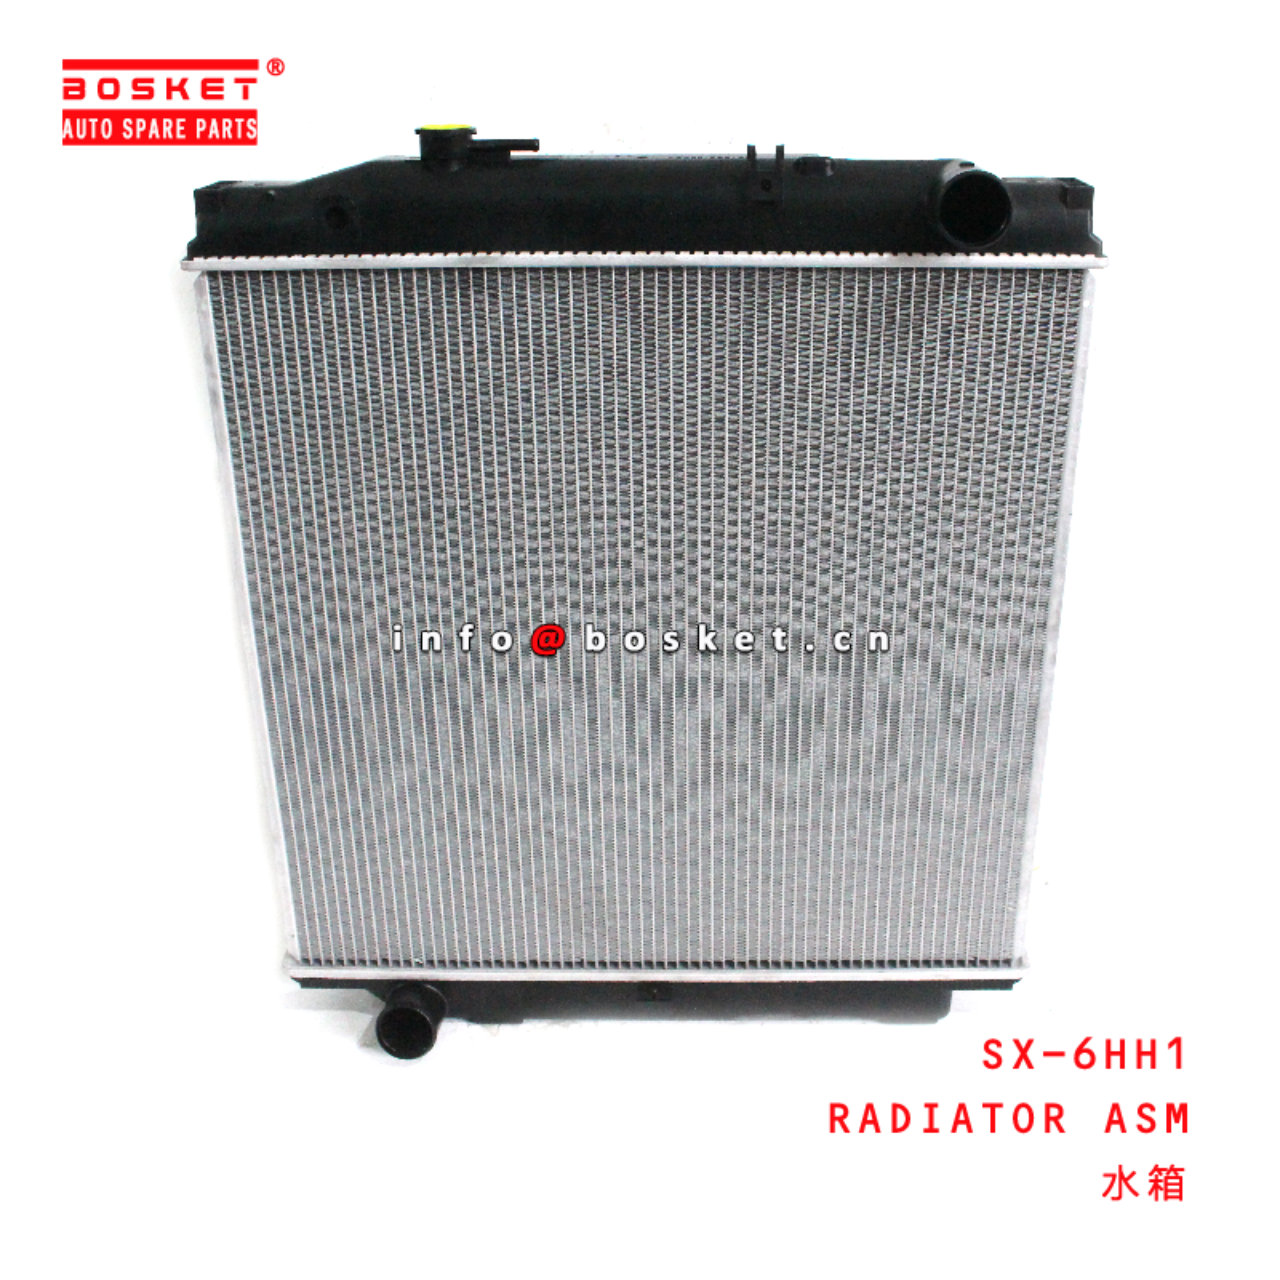 SX-6HH1 Radiator Assembly suitable for ISUZU 6HH1 SX6HH1